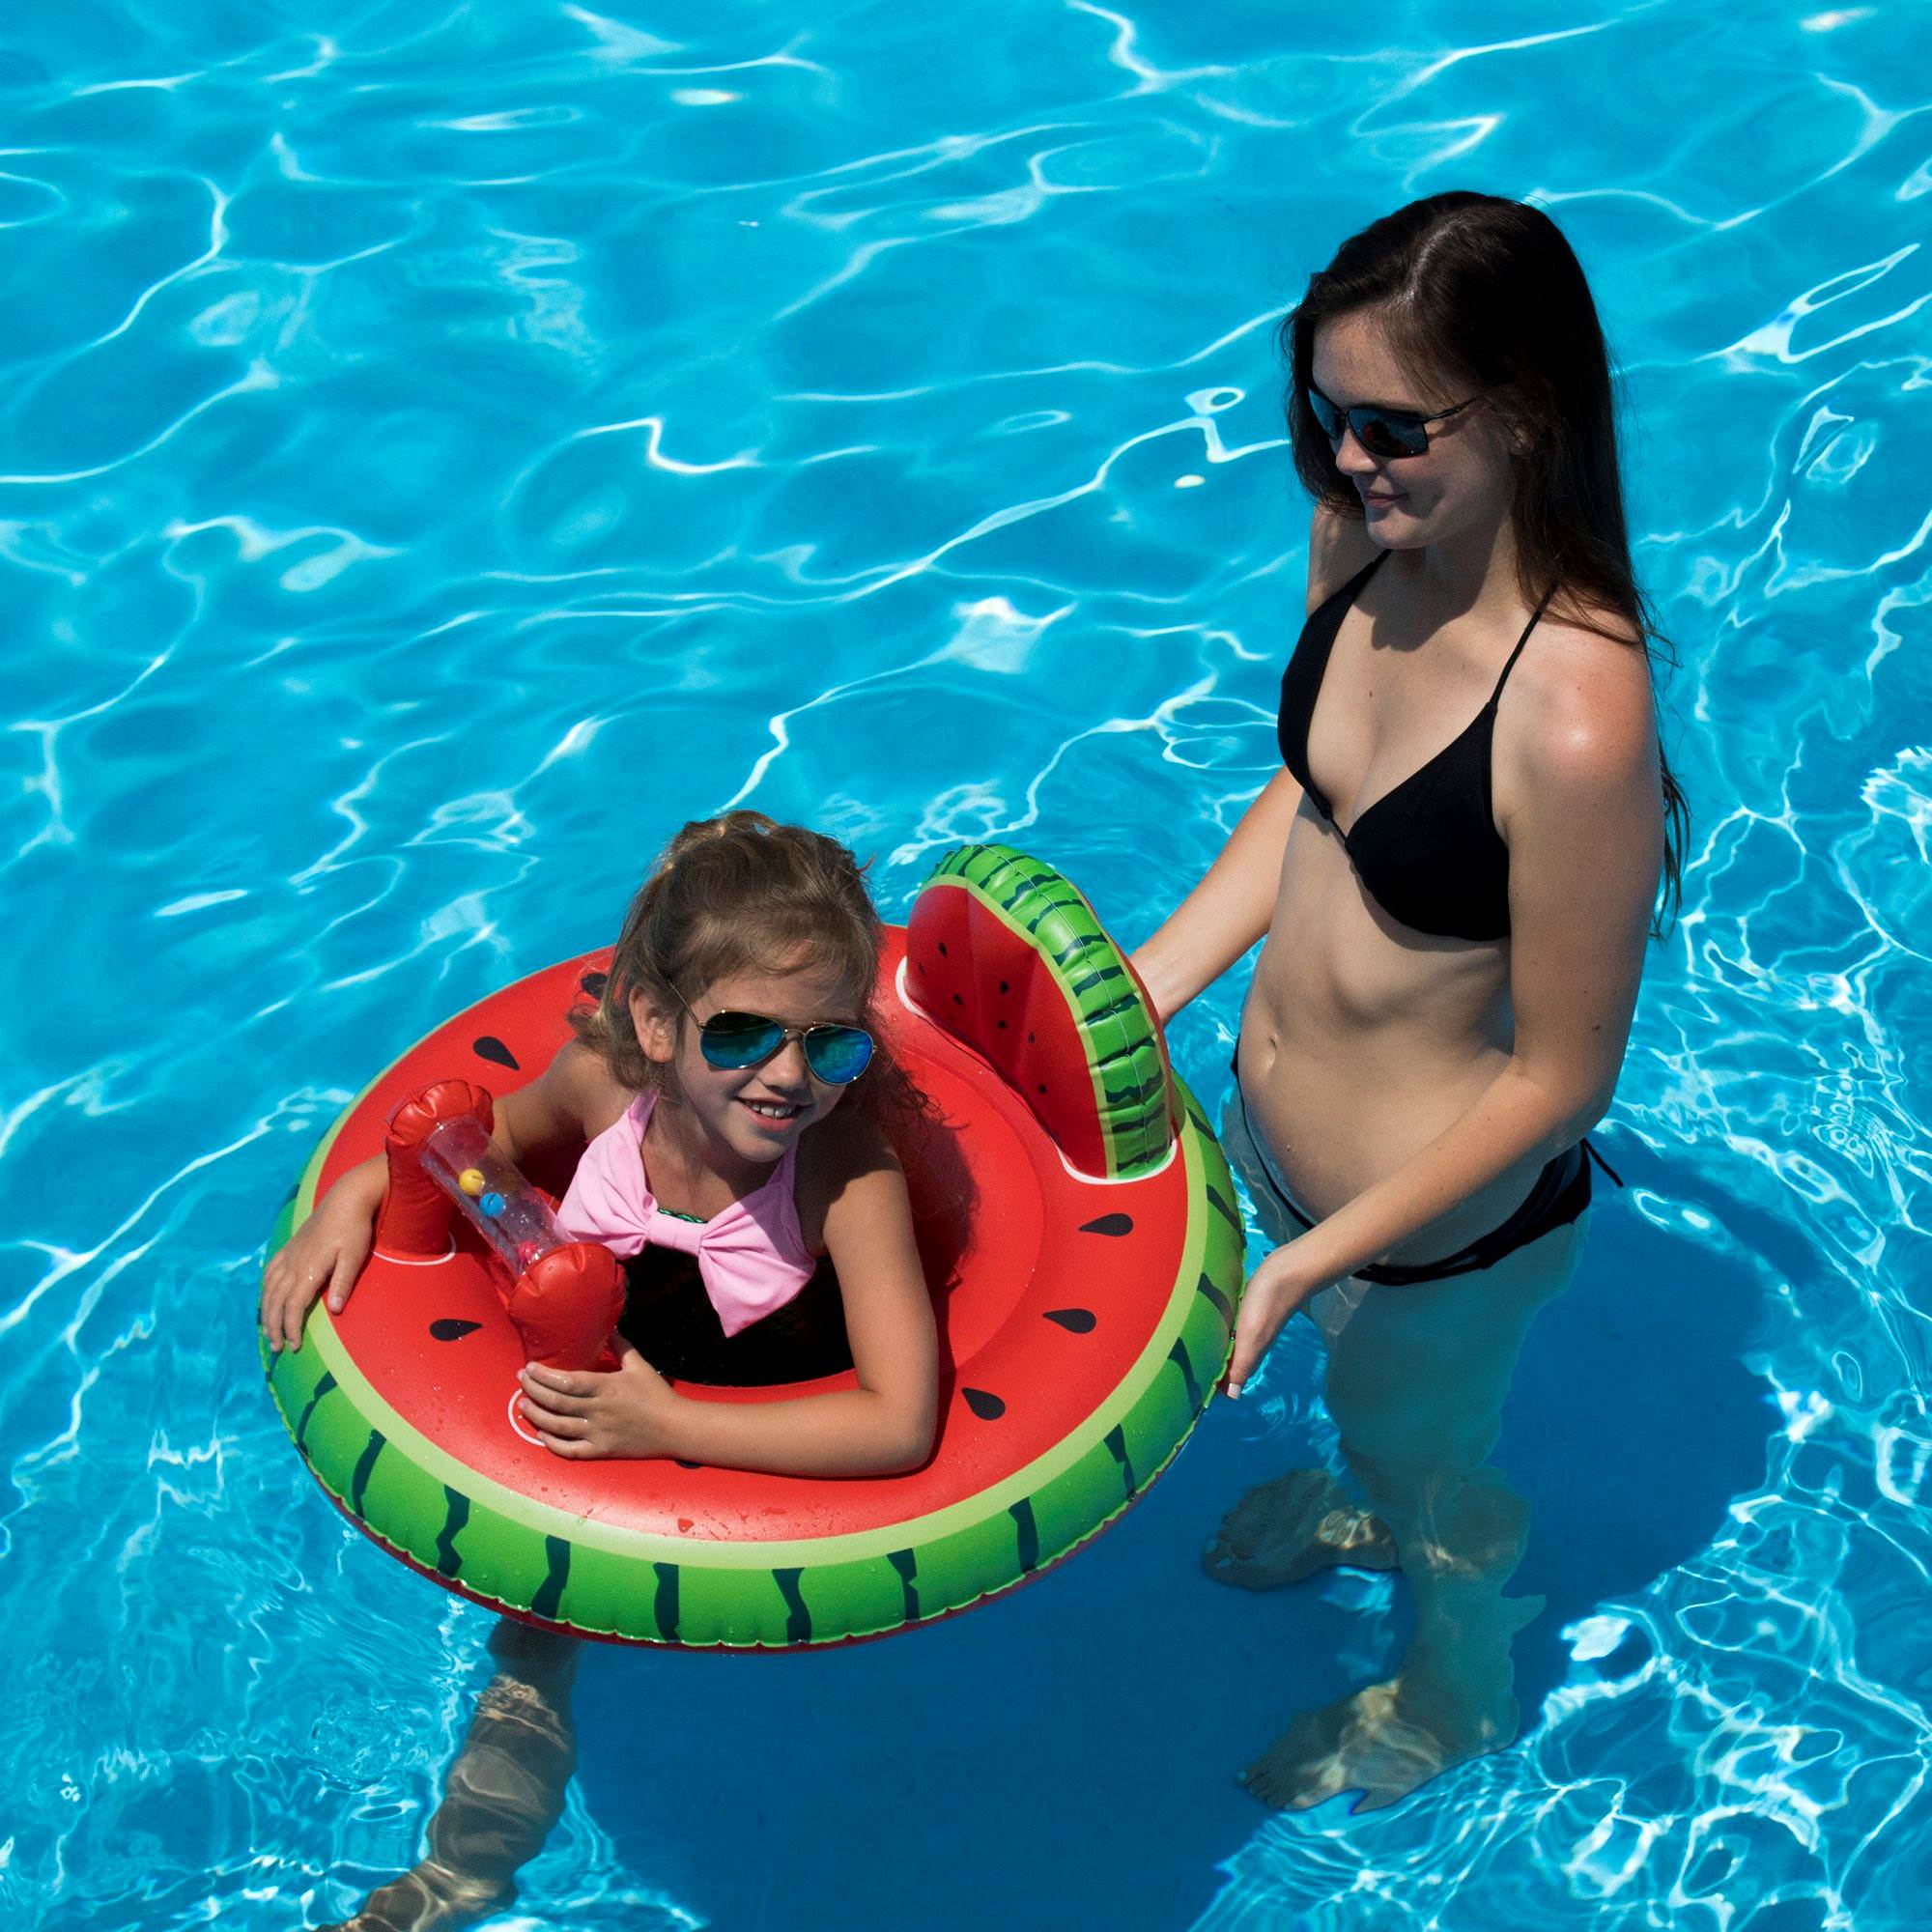 Swimline Watermelon Baby Seat Pool Inflatable Ride-On, Red, Green - image 4 of 5